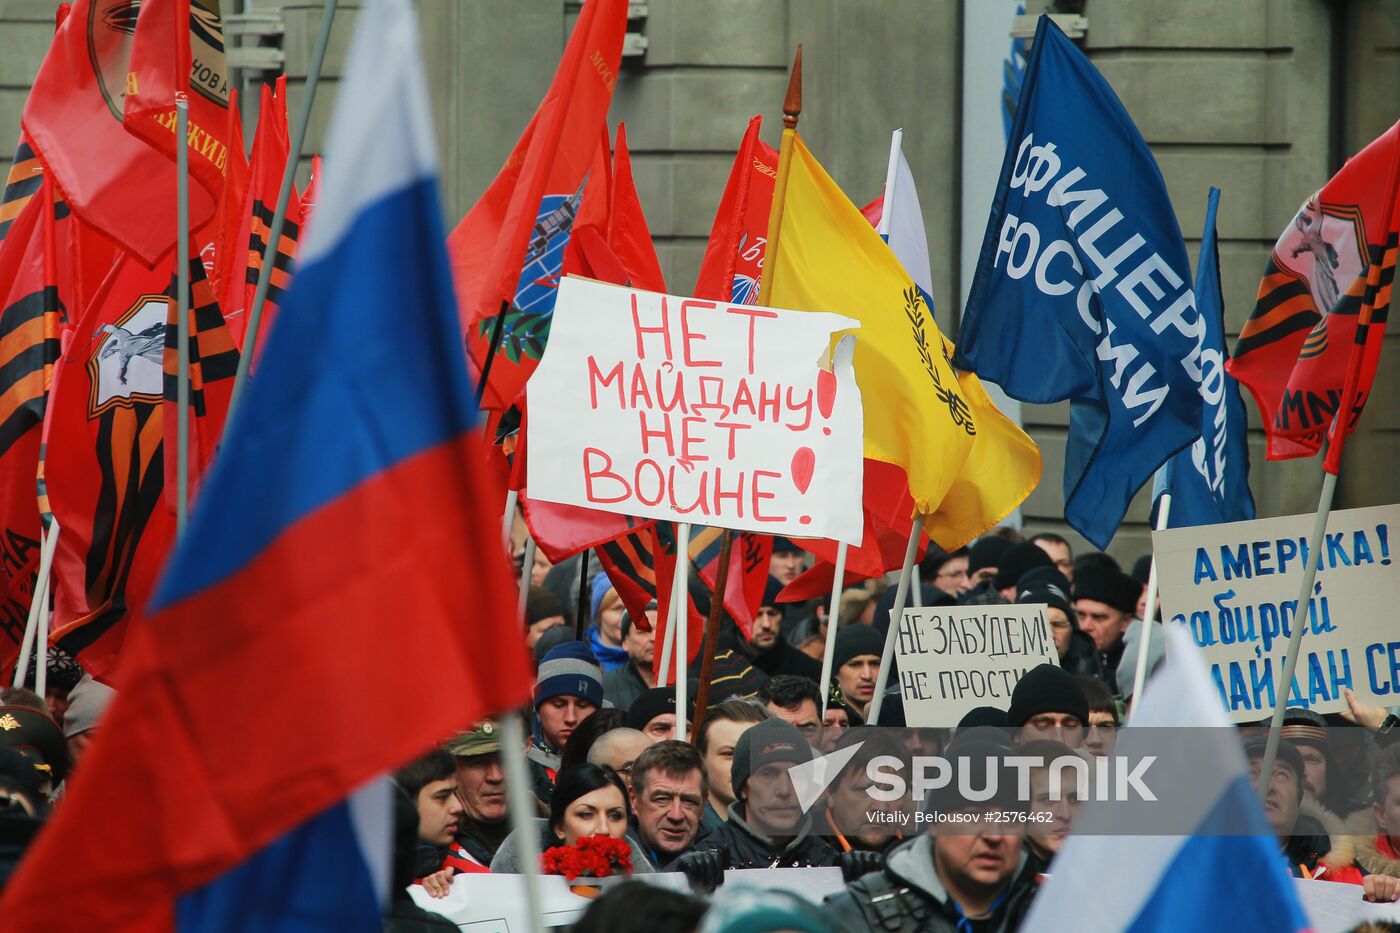 Antimaidan Movement holds rally and march in Moscow